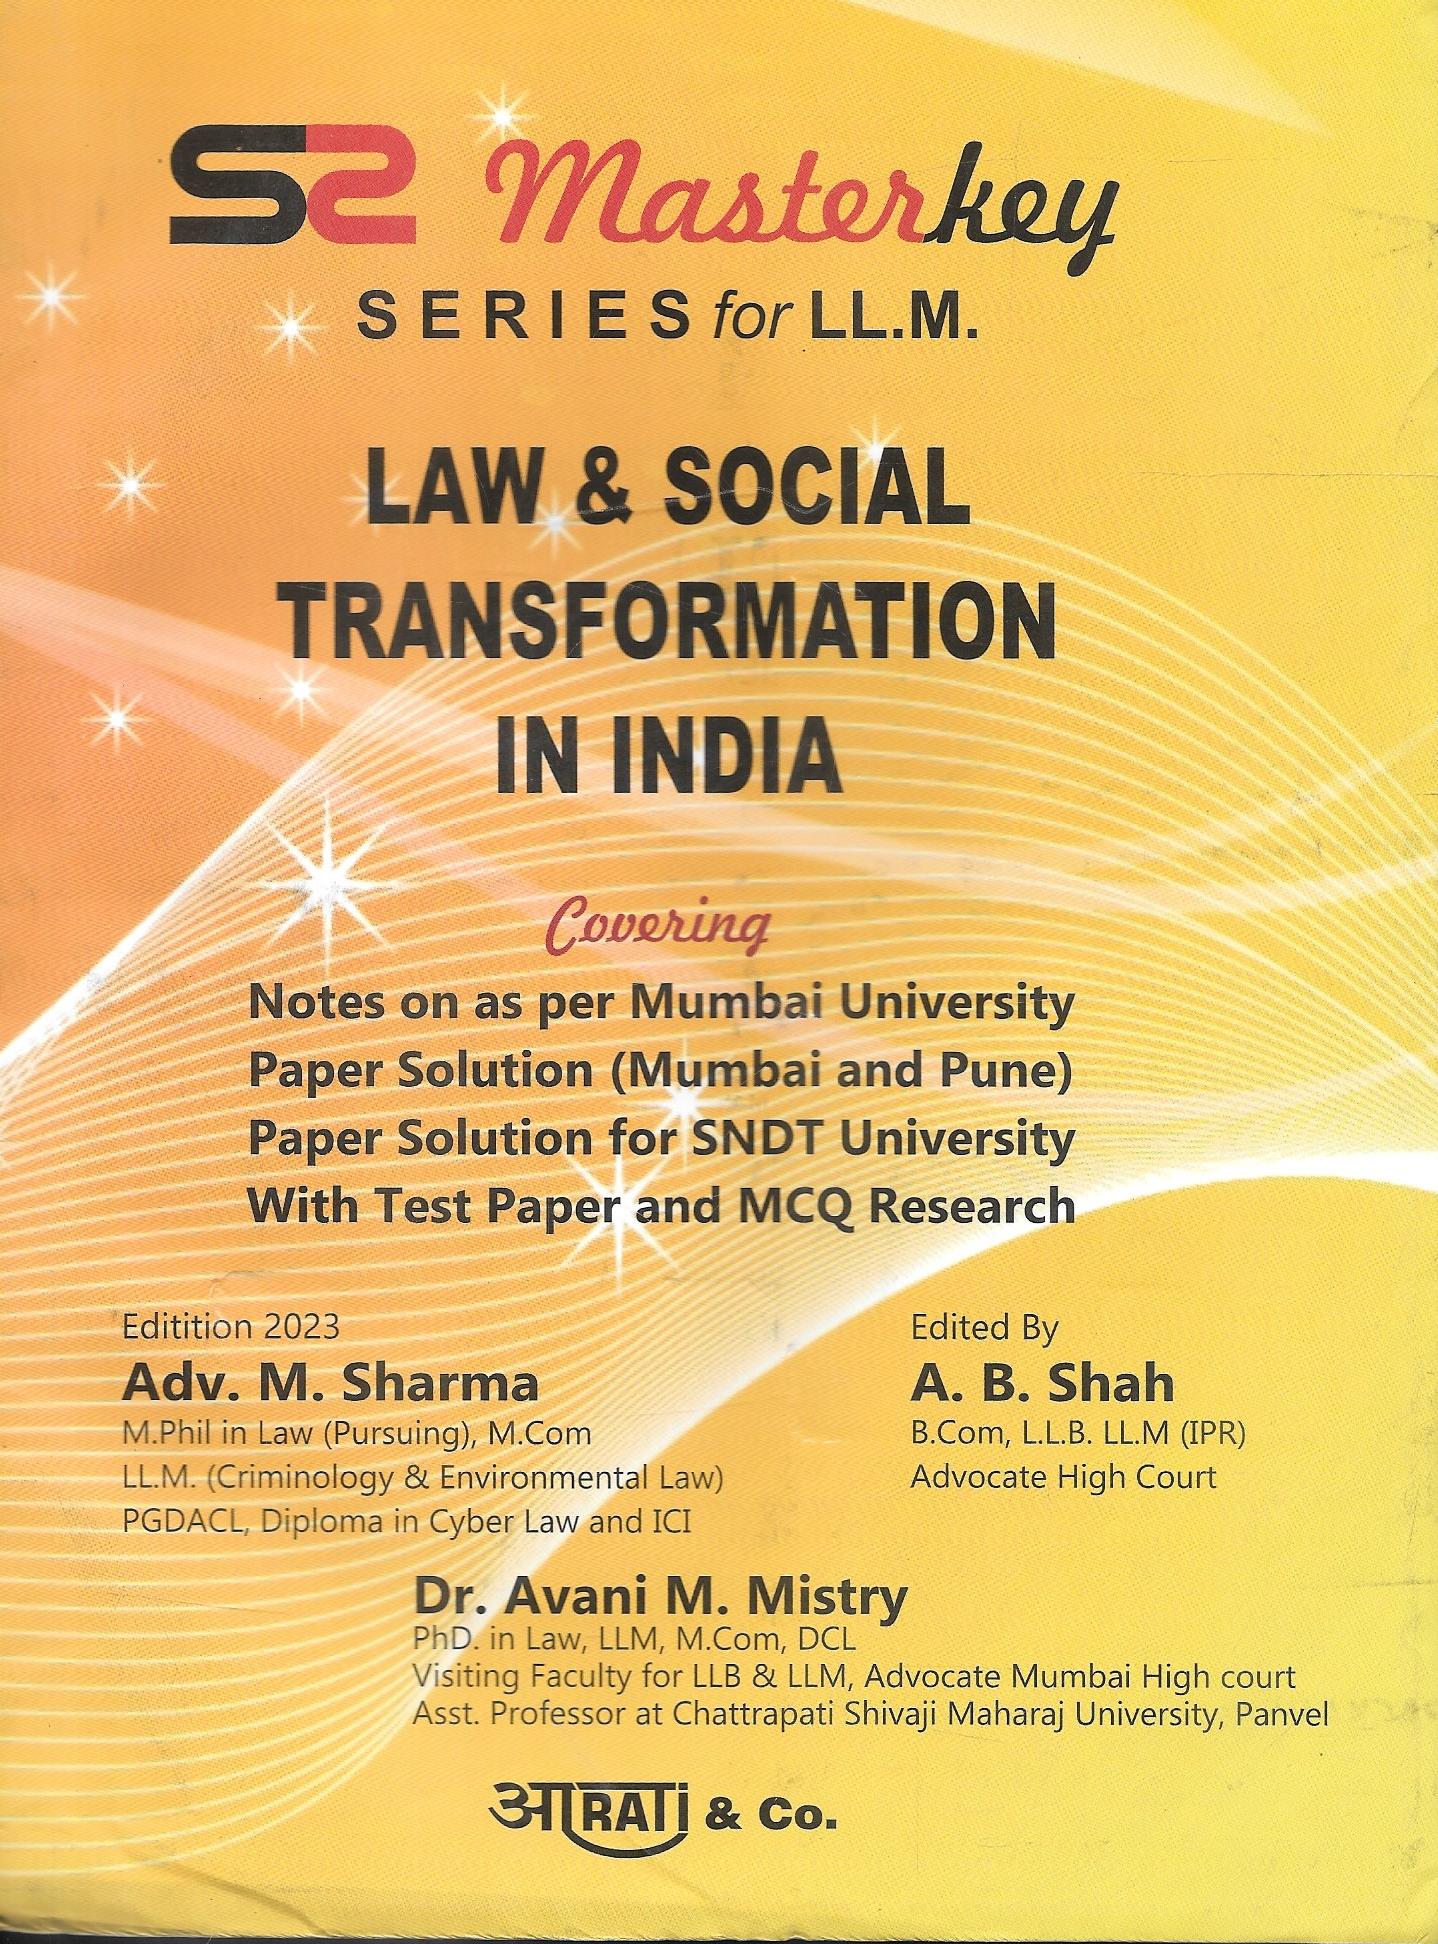 Law and Social Transformation in India - Master Key series for LLM